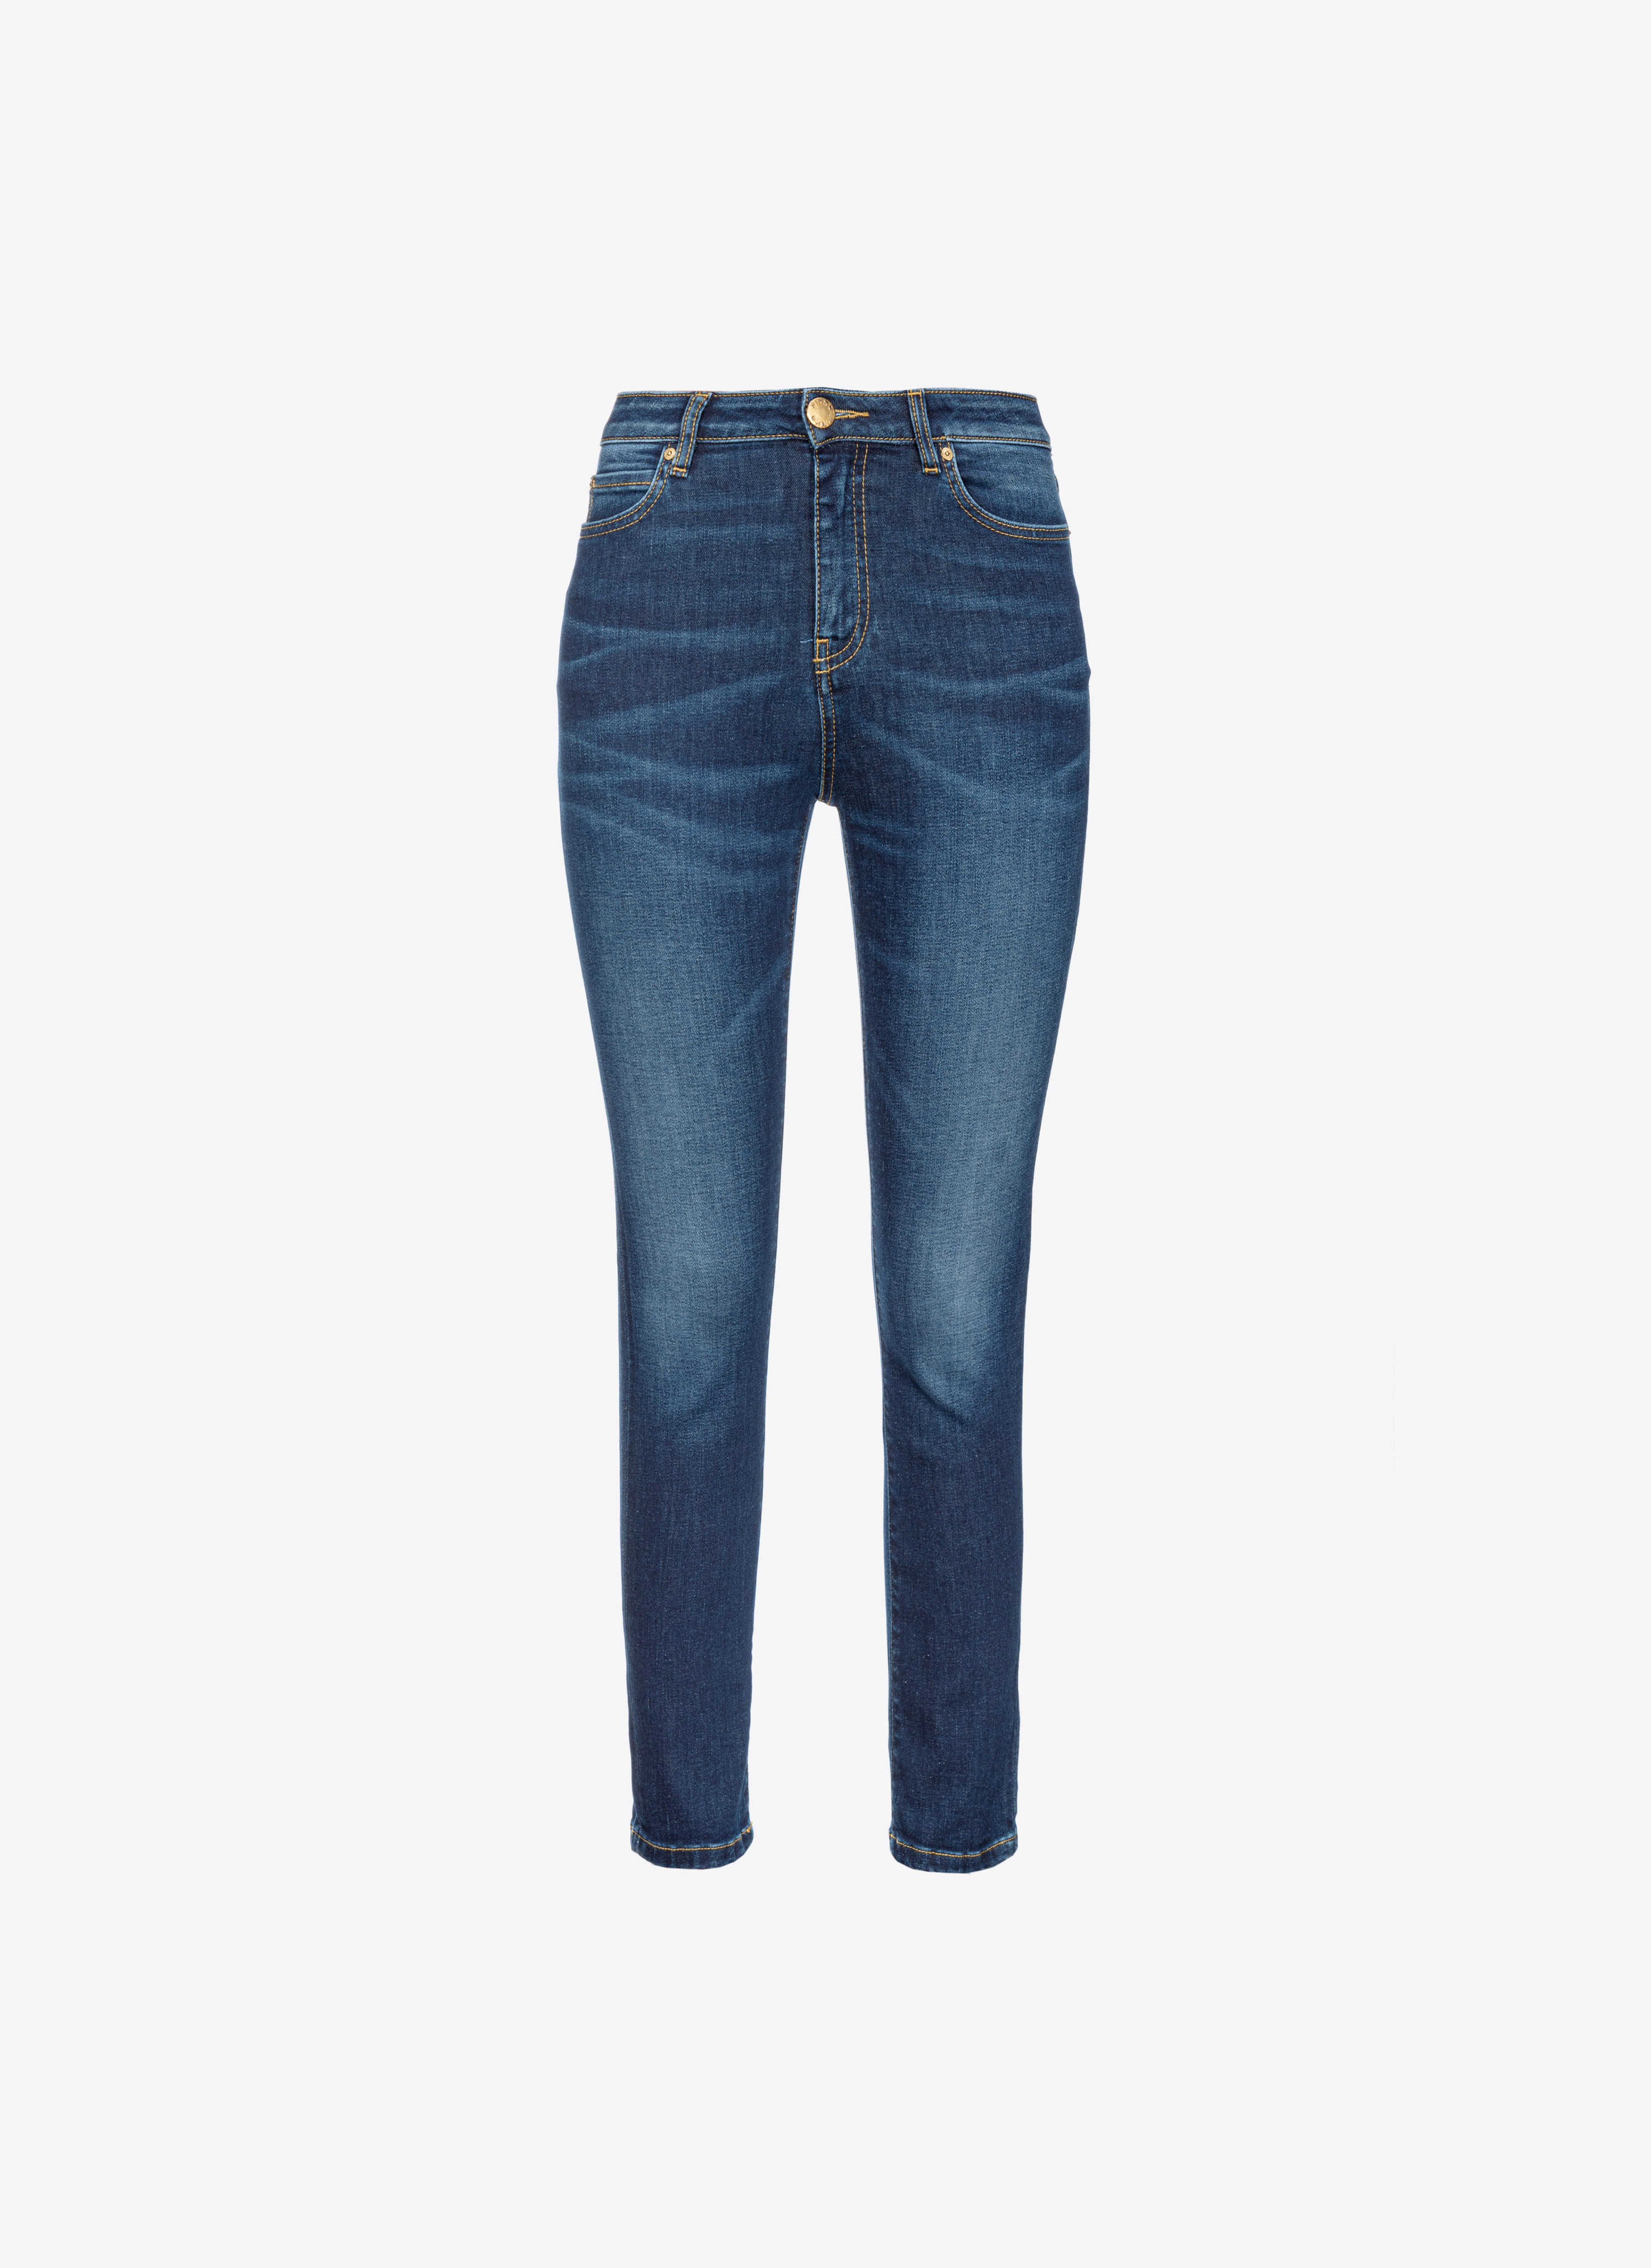 Pinko Skinny Stretch Denim Jeans With Embroidery On The Back In Dark Wash